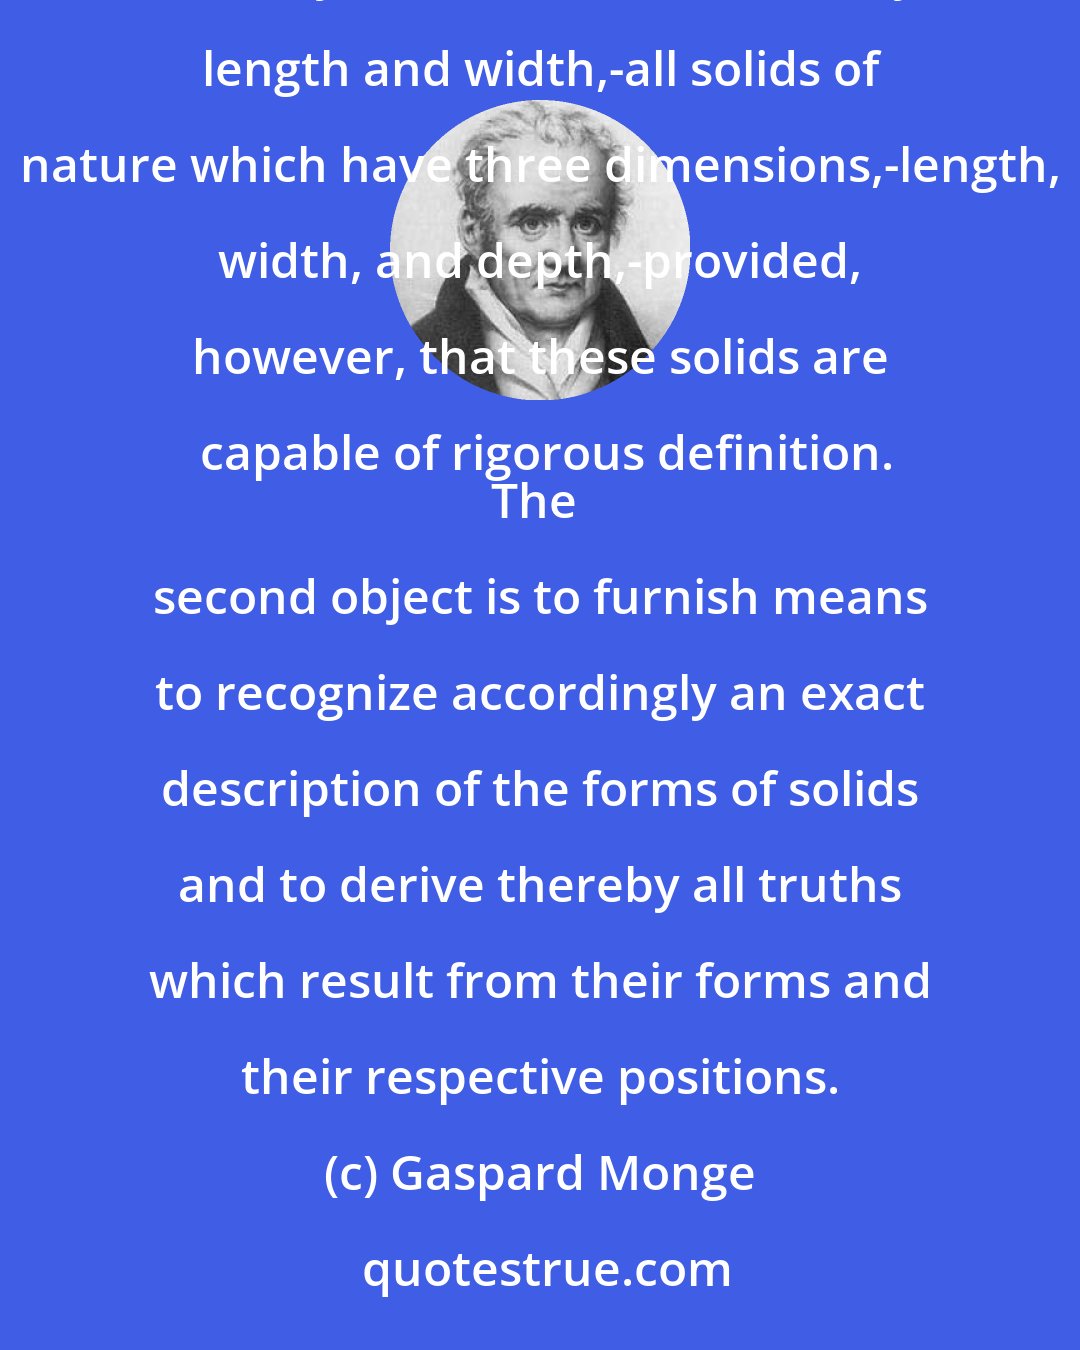 Gaspard Monge: Descriptive geometry has two objects: the first is to establish methods to represent on drawing paper which has only two dimensions,-namely, length and width,-all solids of nature which have three dimensions,-length, width, and depth,-provided, however, that these solids are capable of rigorous definition.
The second object is to furnish means to recognize accordingly an exact description of the forms of solids and to derive thereby all truths which result from their forms and their respective positions.